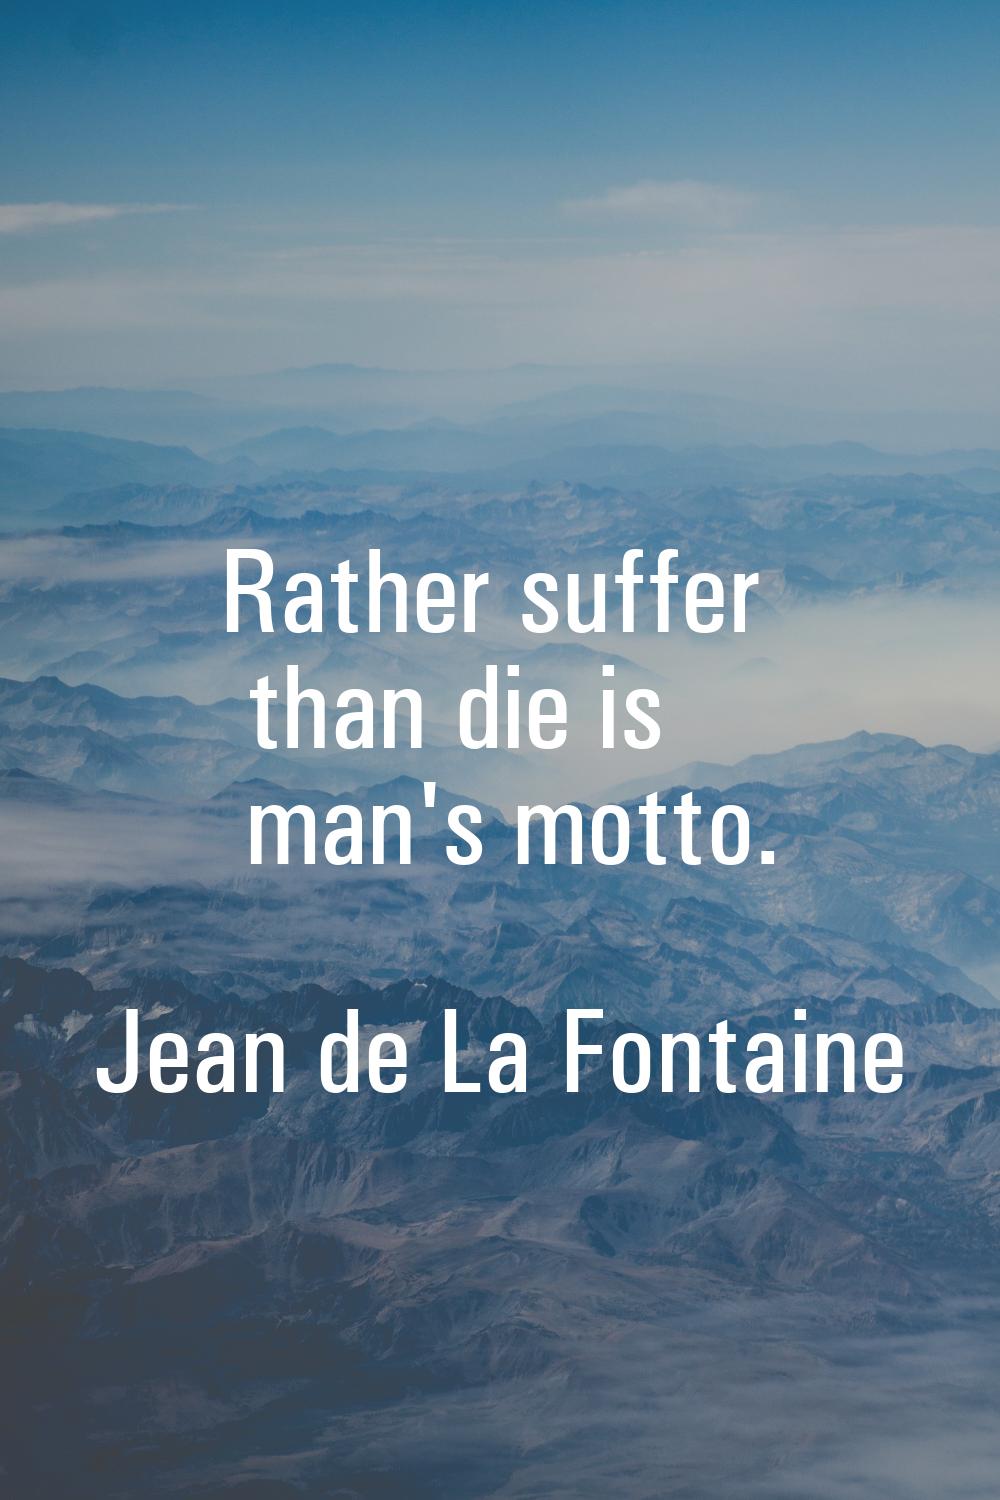 Rather suffer than die is man's motto.